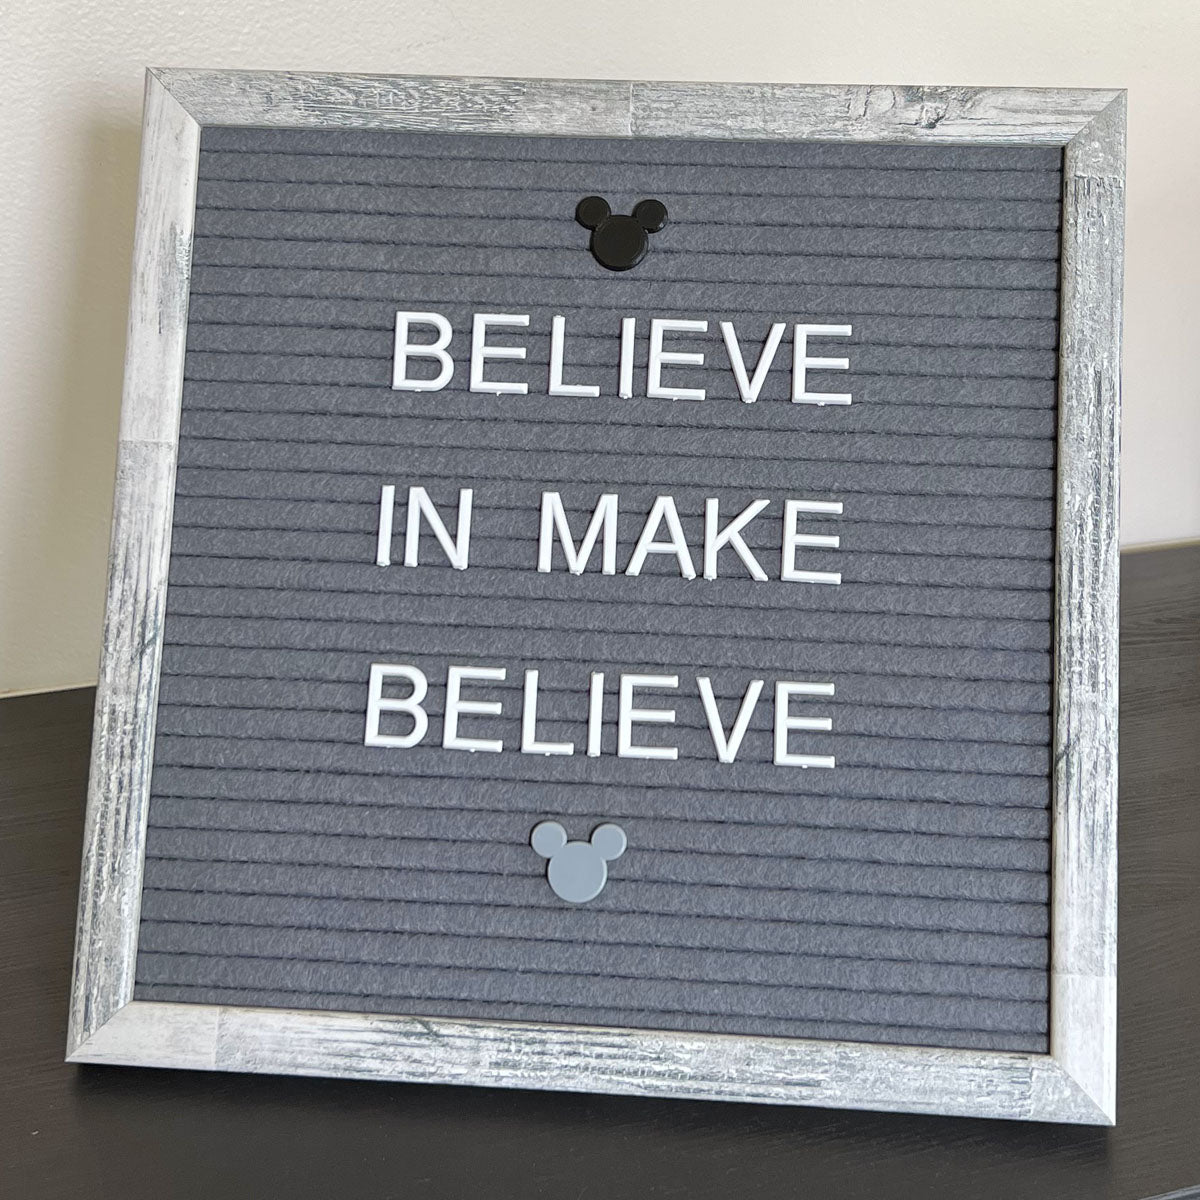 12"x12" Gray Felt Letter Board with Wood Frame